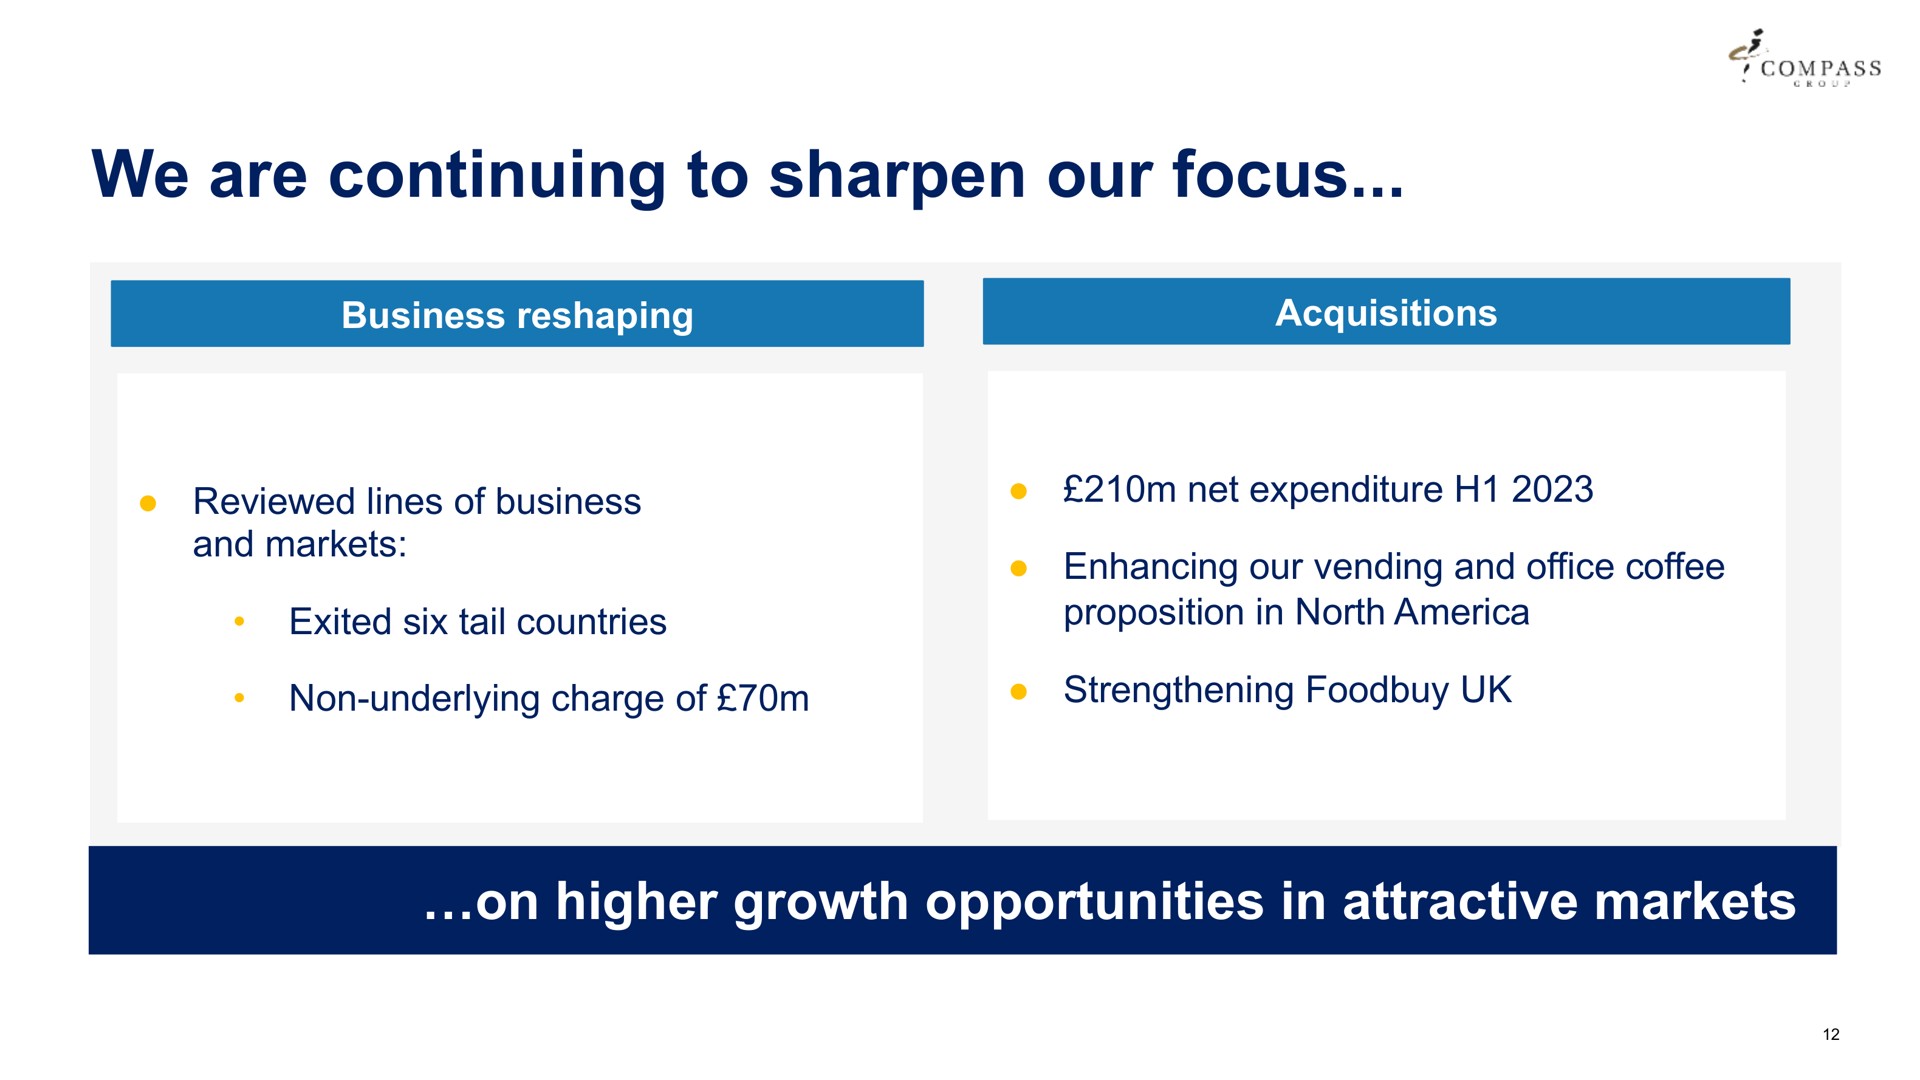 we are continuing to sharpen our focus a compass reviewed lines of business and markets exited six tail countries net expenditure enhancing vending and office coffee proposition in north non underlying charge of strengthening on higher growth opportunities in attractive markets | Compass Group